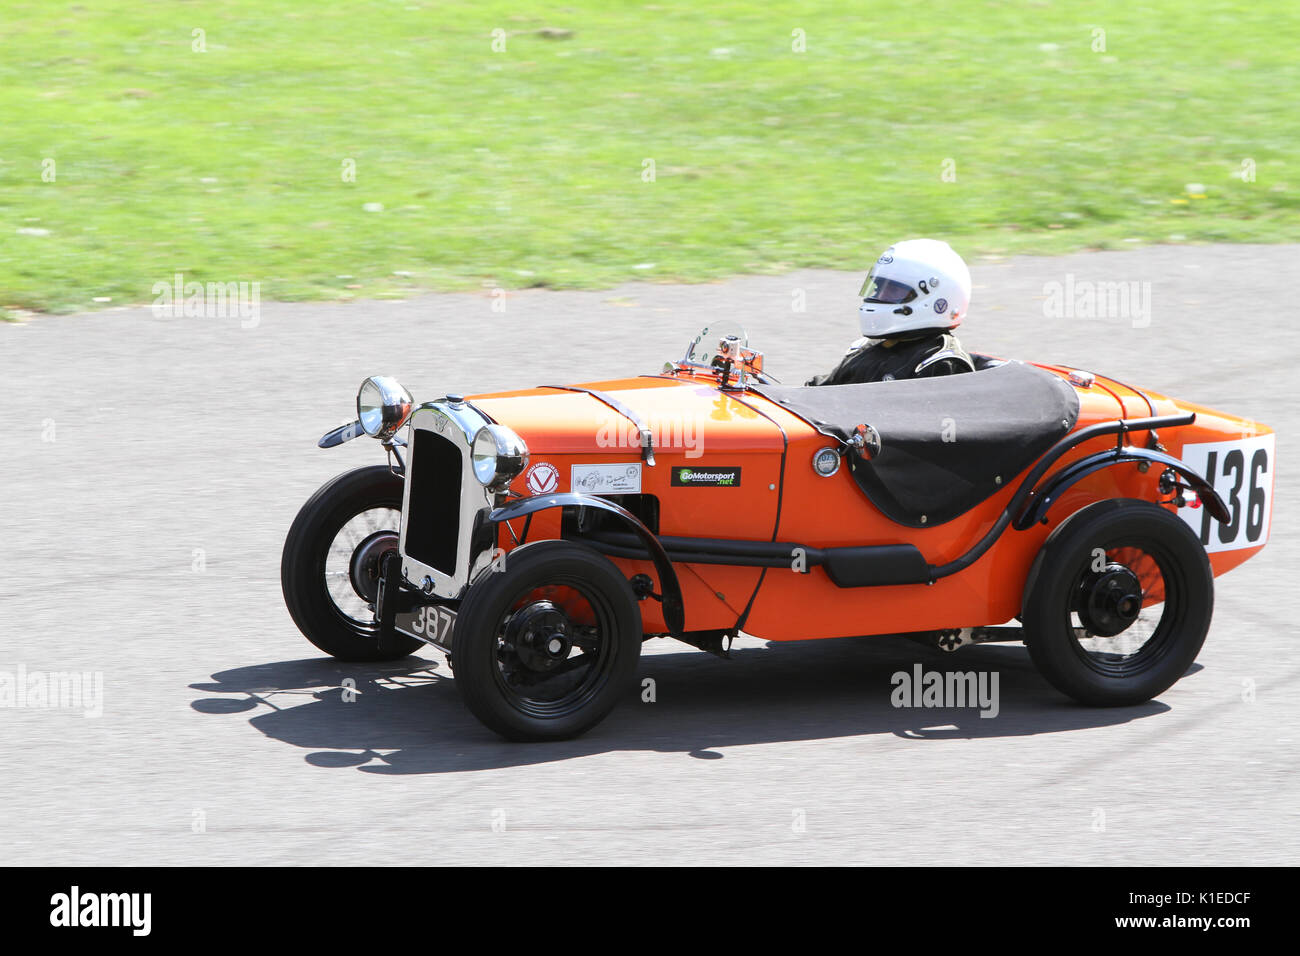 London, UK. 27th August, 2017. 1930 Austin Ulster competing in the time trials at Motorsport at the Palace in South London England 27 08 2017 Credit: theodore liasi/Alamy Live News Stock Photo